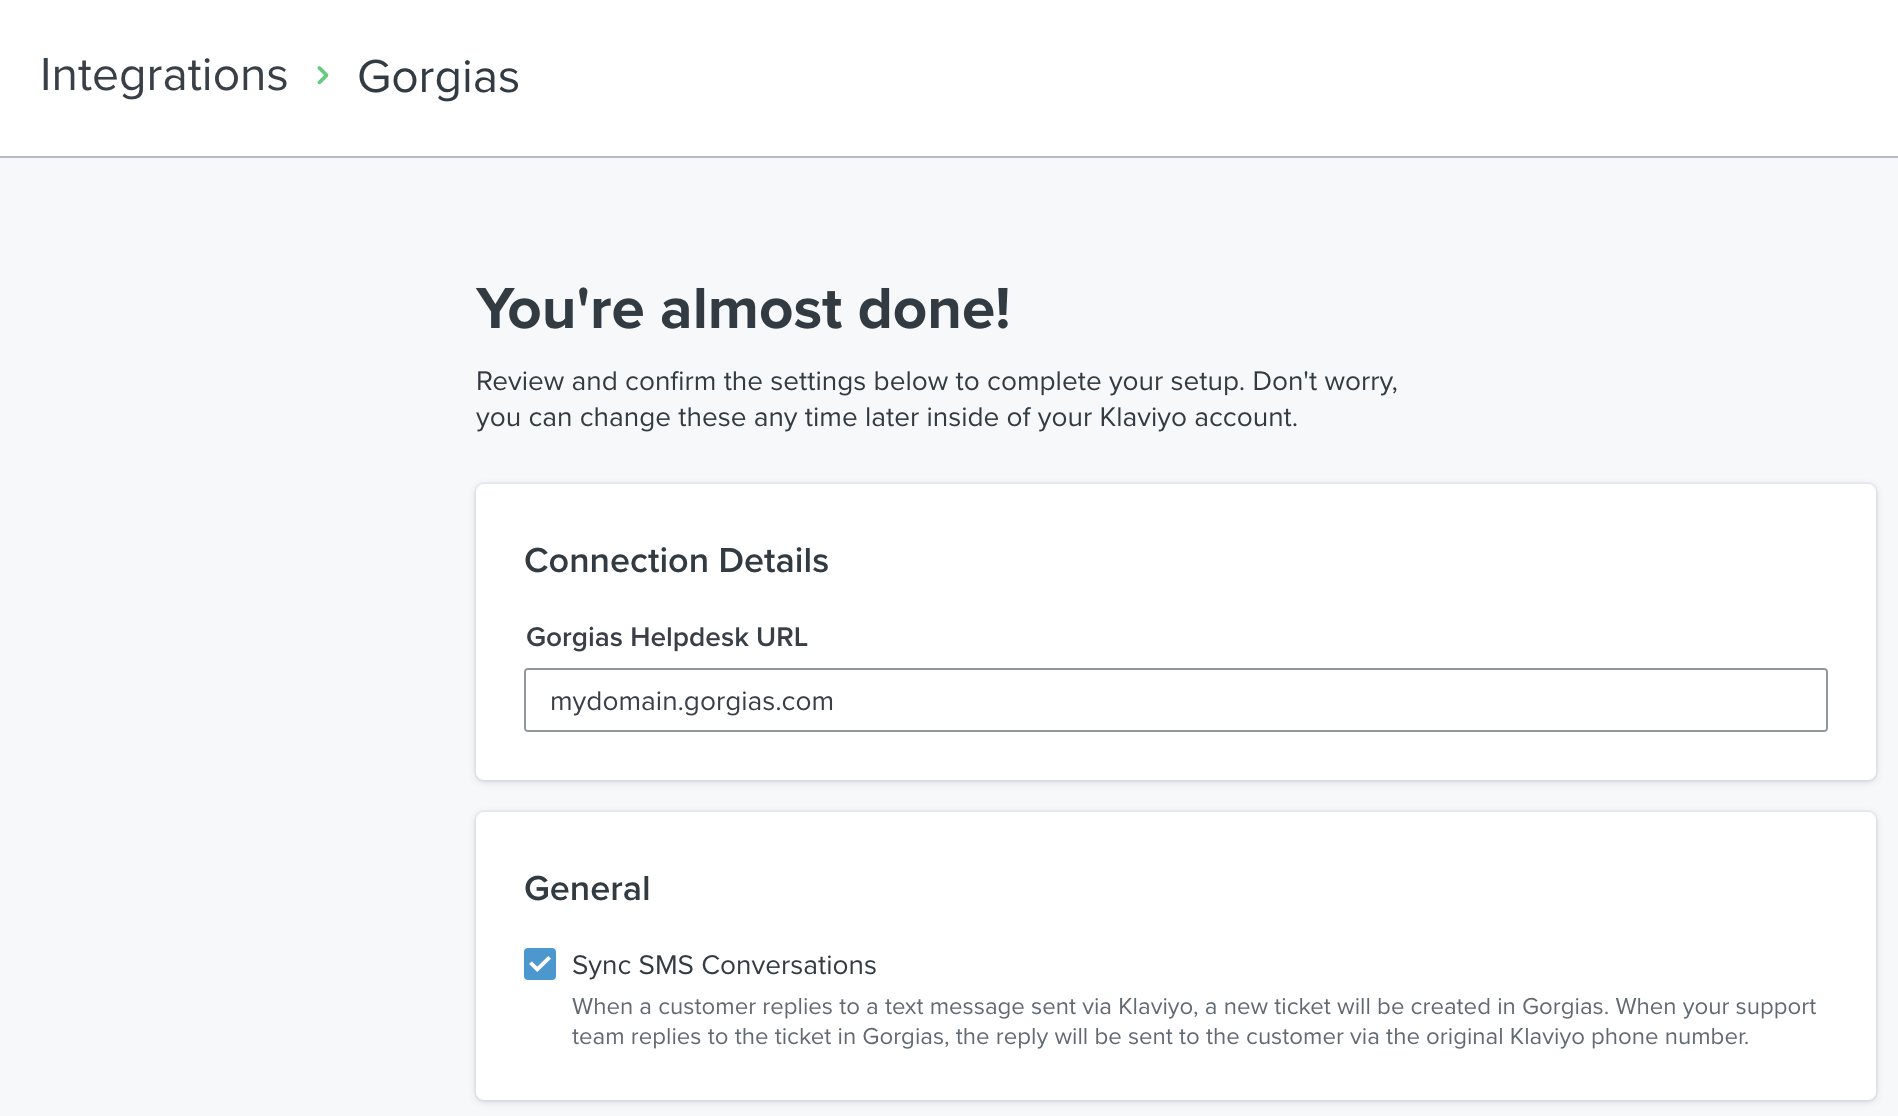 Screen to enter Gorgias helpdesk URL, with Sync SMS Conversations option toggled under URL